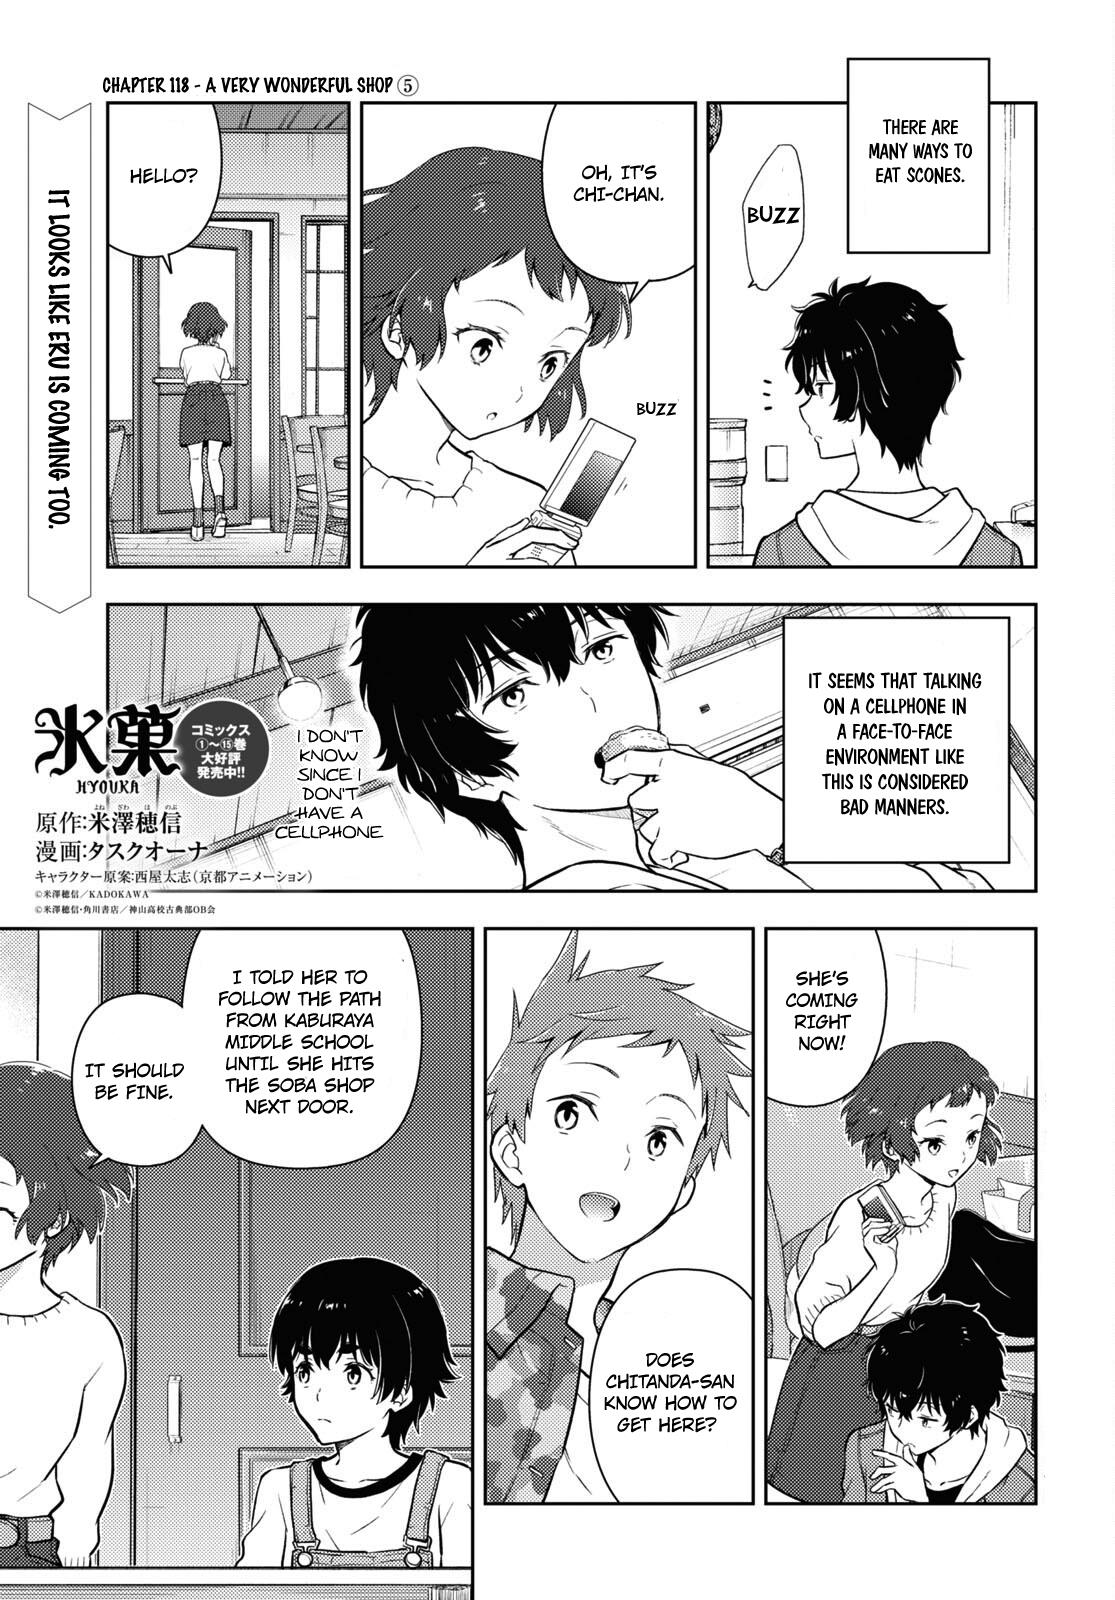 Hyouka Chapter 118: A Very Wonderful Shop ⑤ - Picture 1